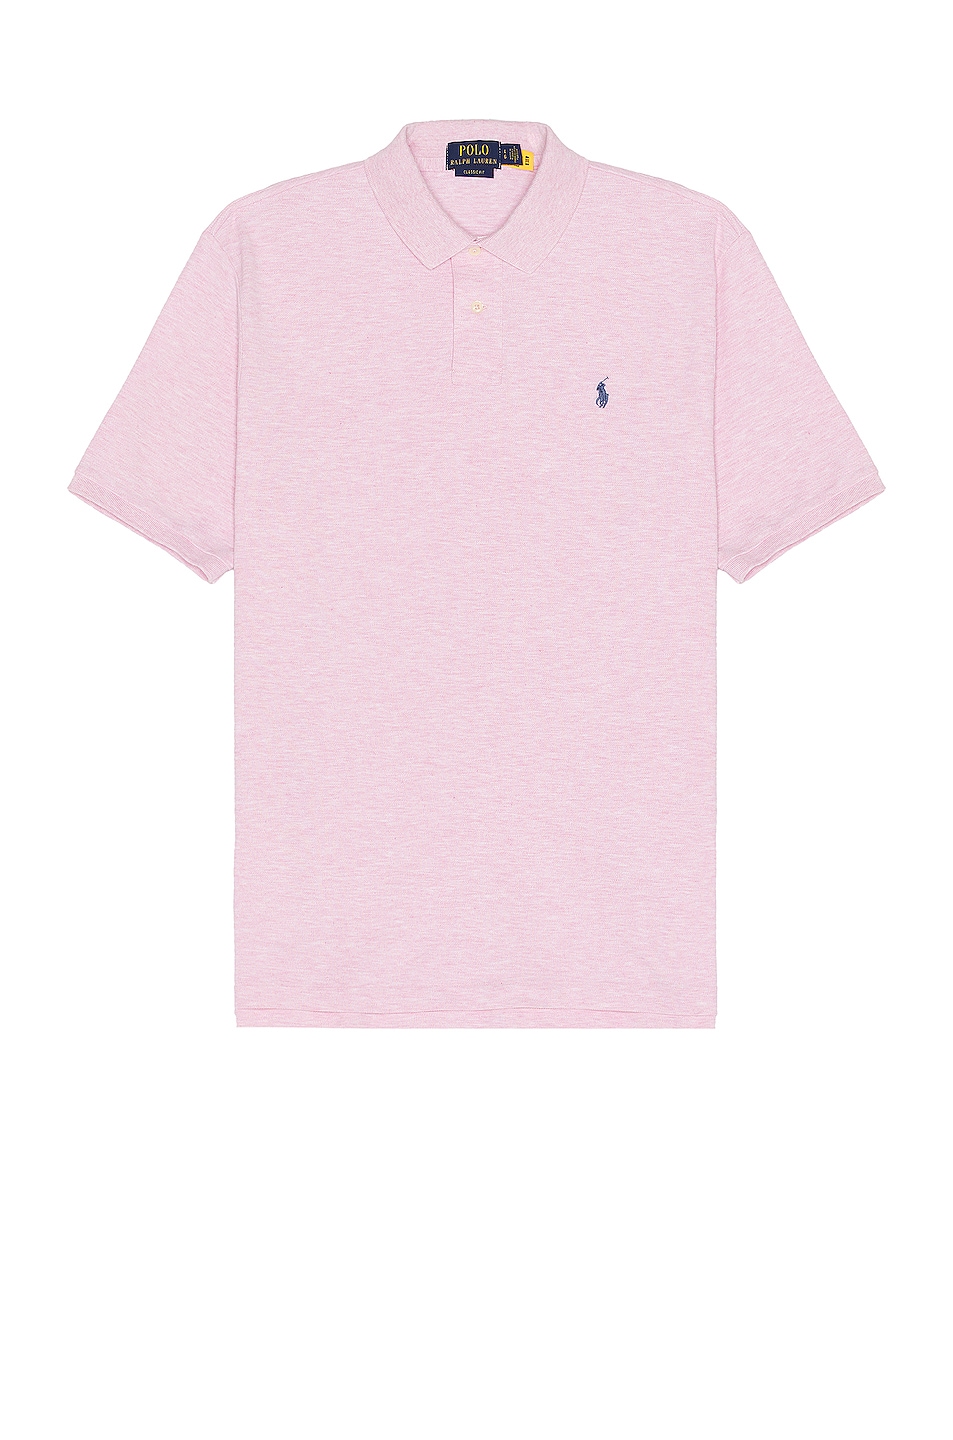 Image 1 of Polo Ralph Lauren Polo in Bath Pink Heather